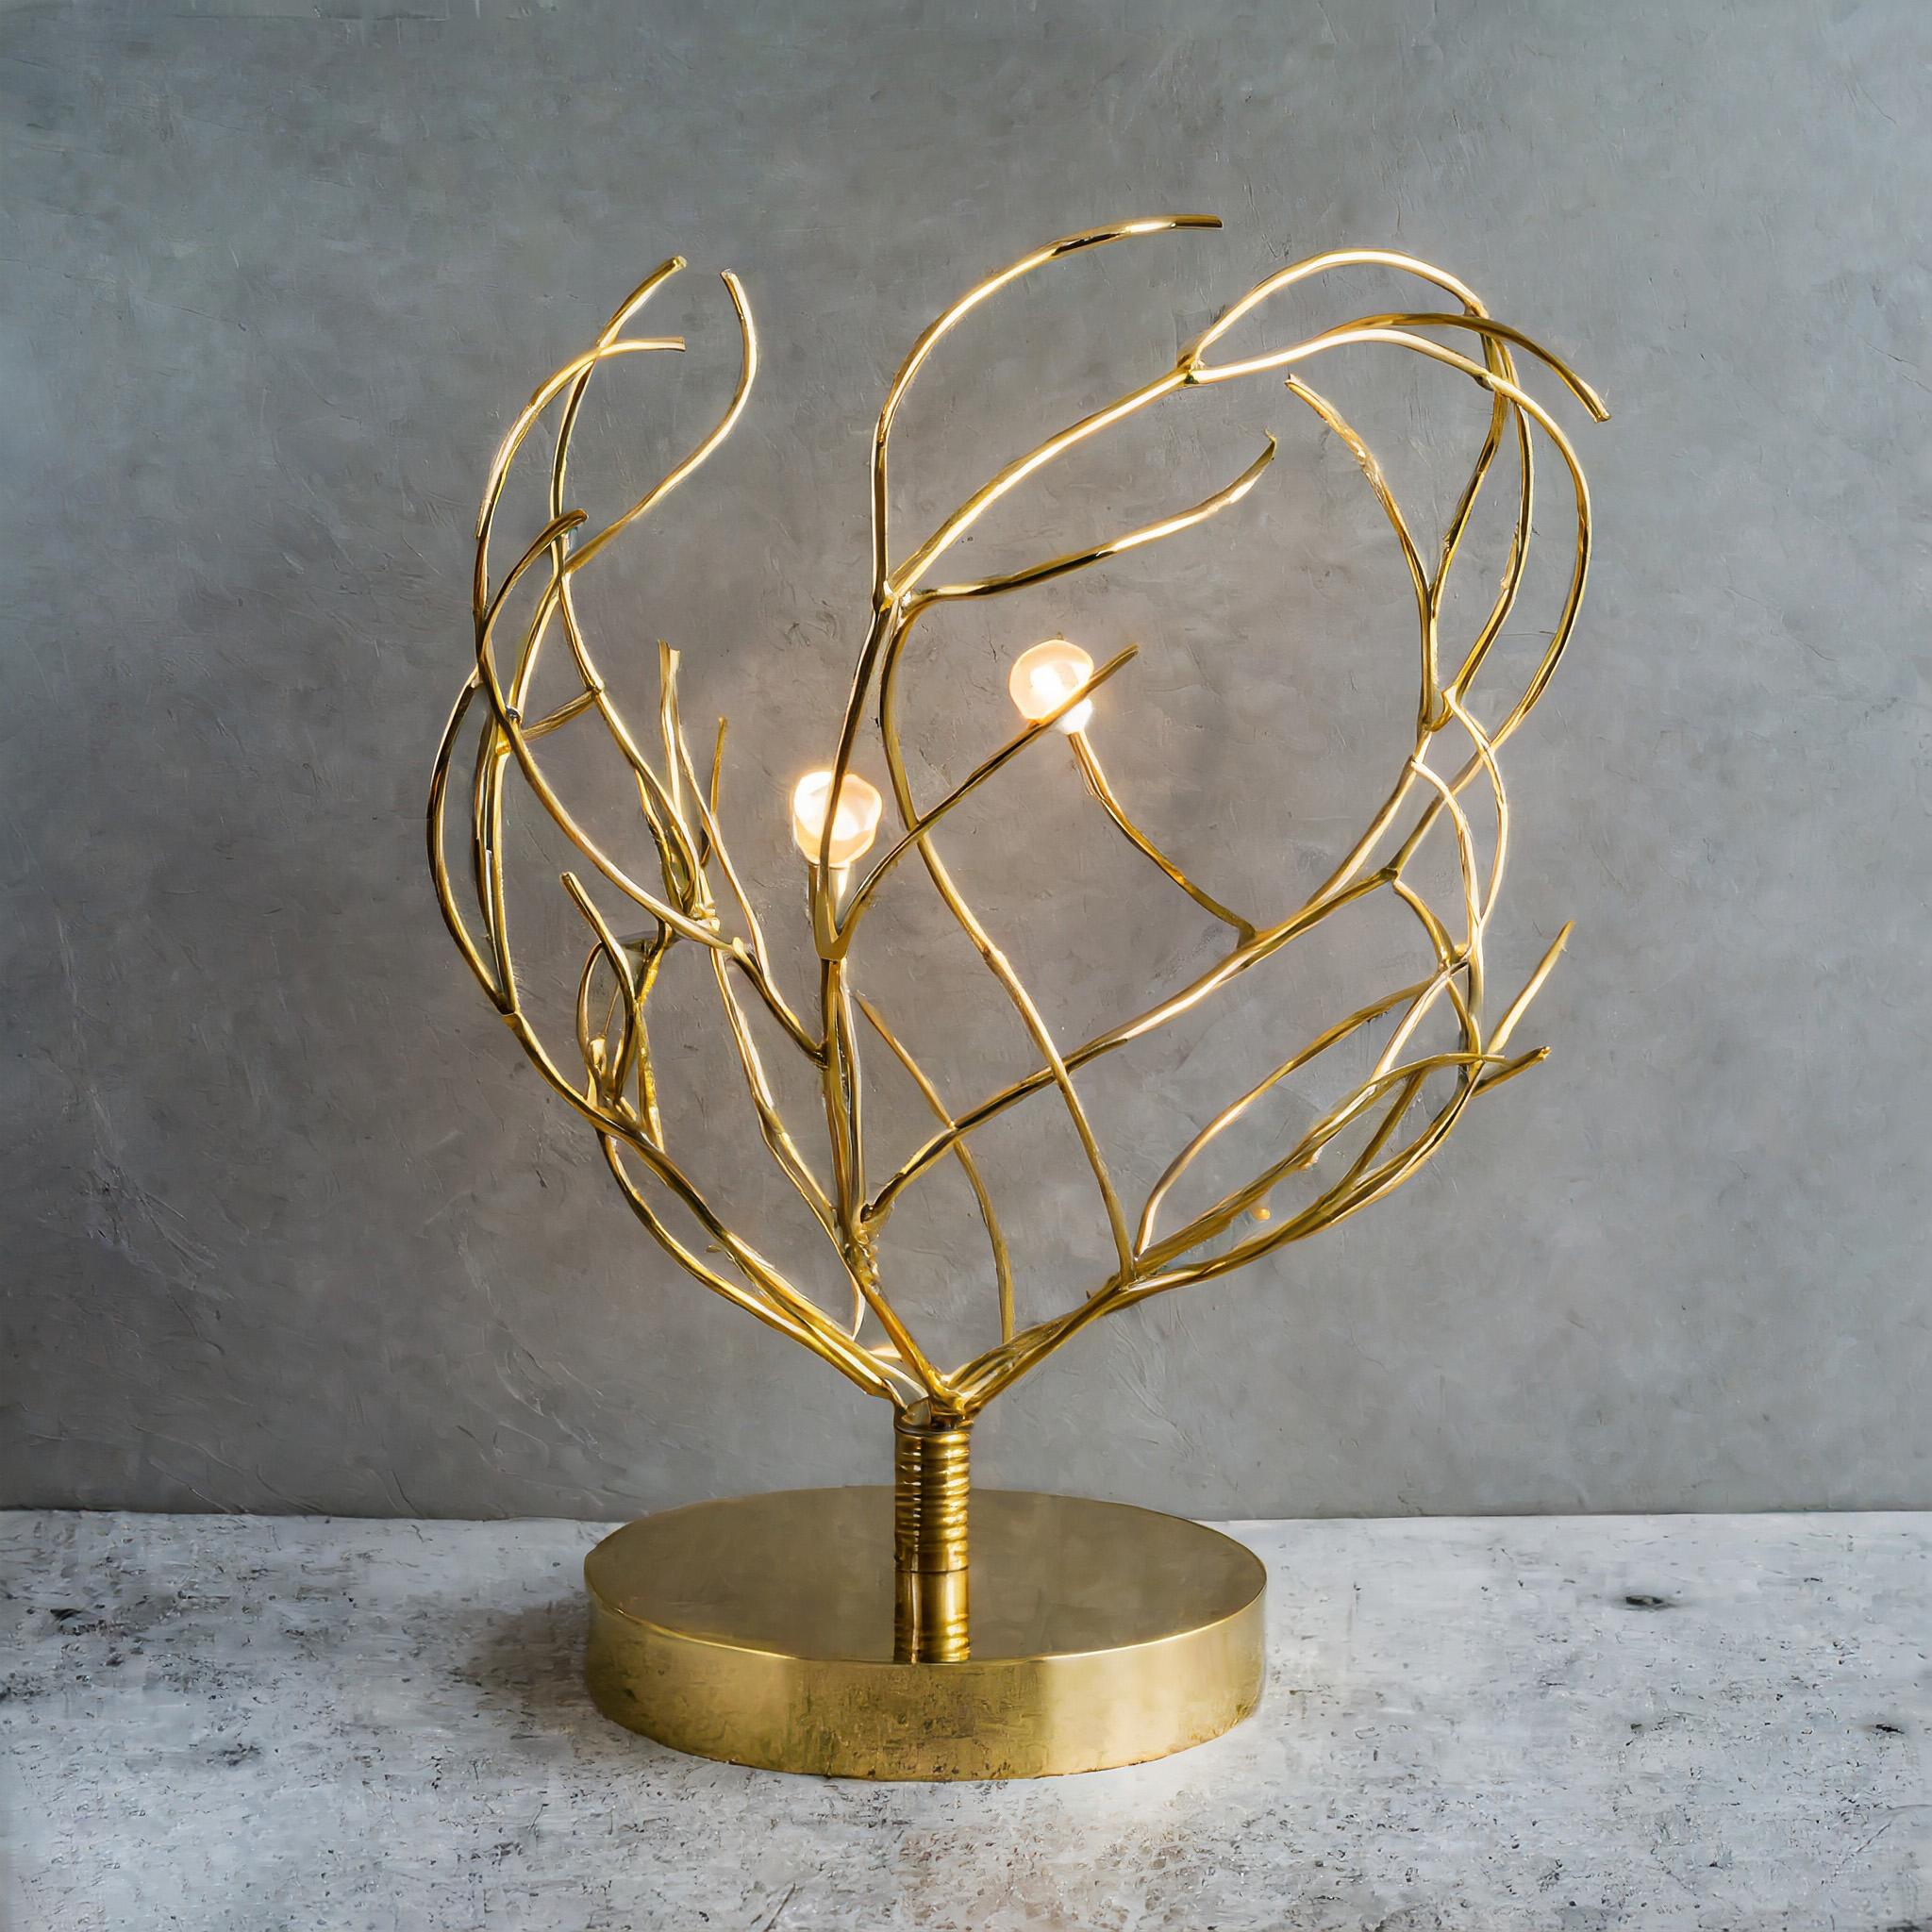 Introducing our exquisite golden brass desk lamp, 'Rhea'– a true poetic masterpiece. Crafted to mimic the organic beauty of branching structures, delicate brass wires intertwine to form tree-like branches, each adorned with 2 to 3 integrated lights